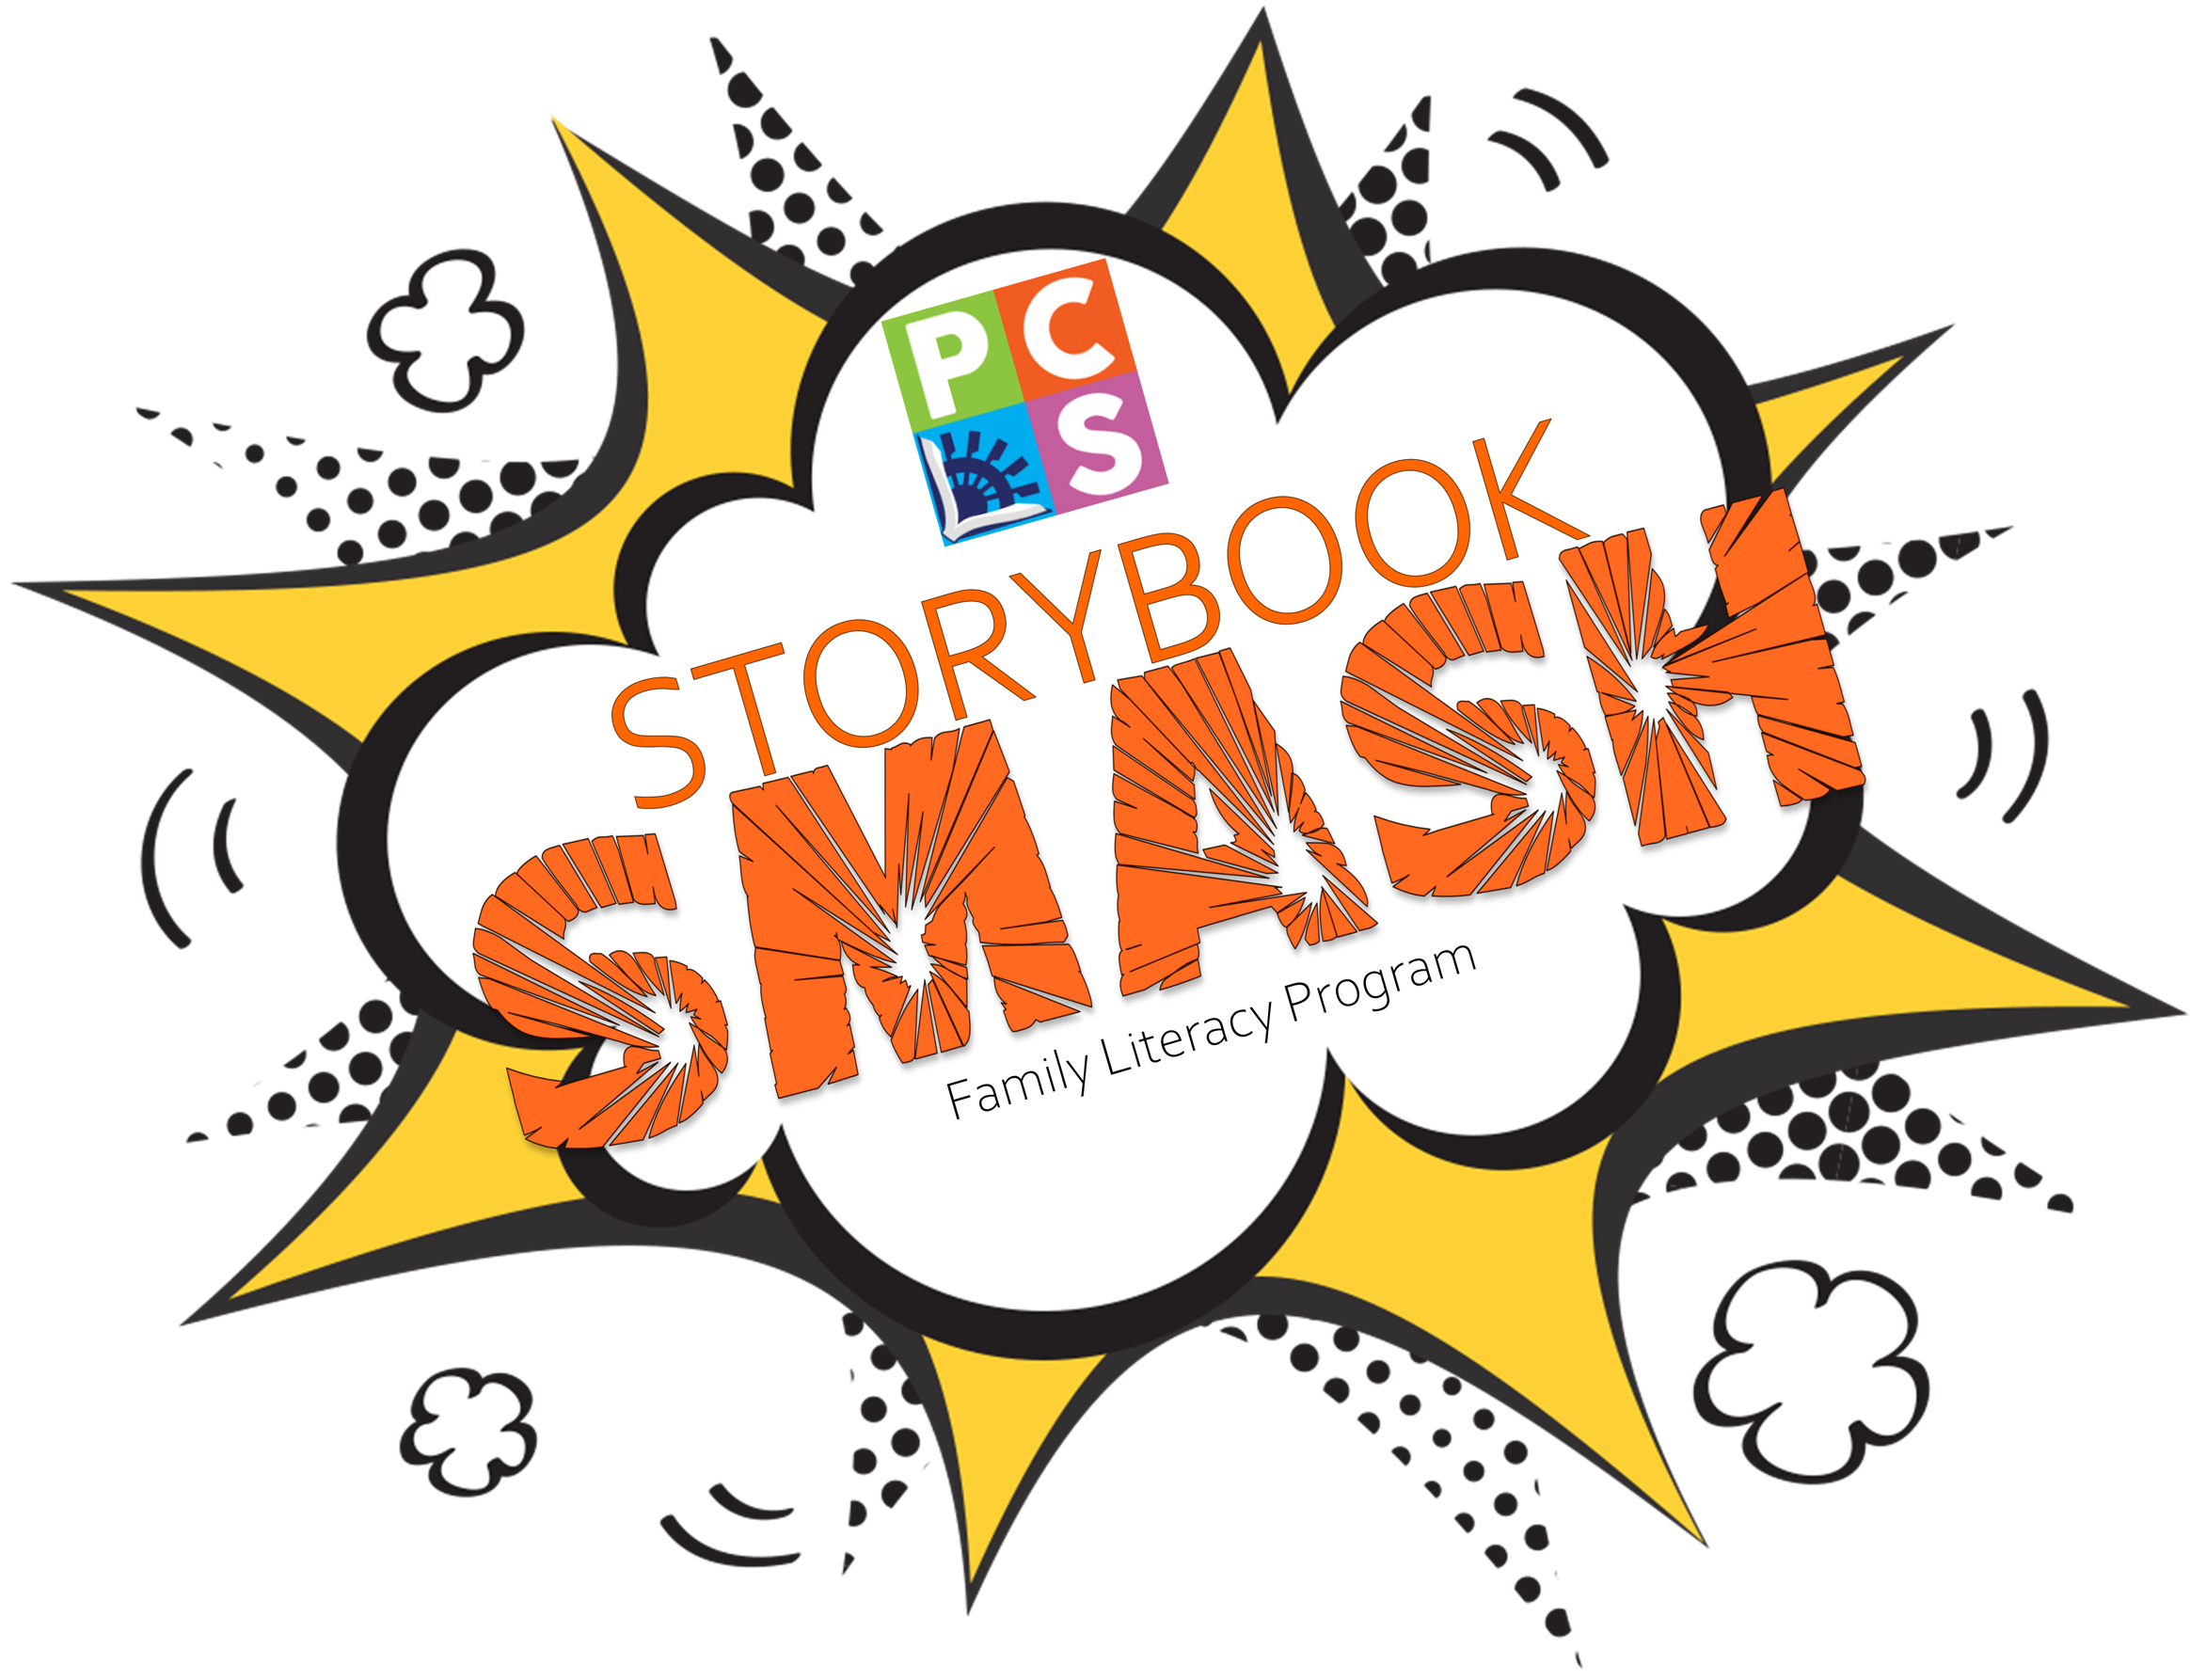 Click here for more information about the free food, fun, and family time at the Putnam County Library System's StorybookSMASH Family Literacy Program.